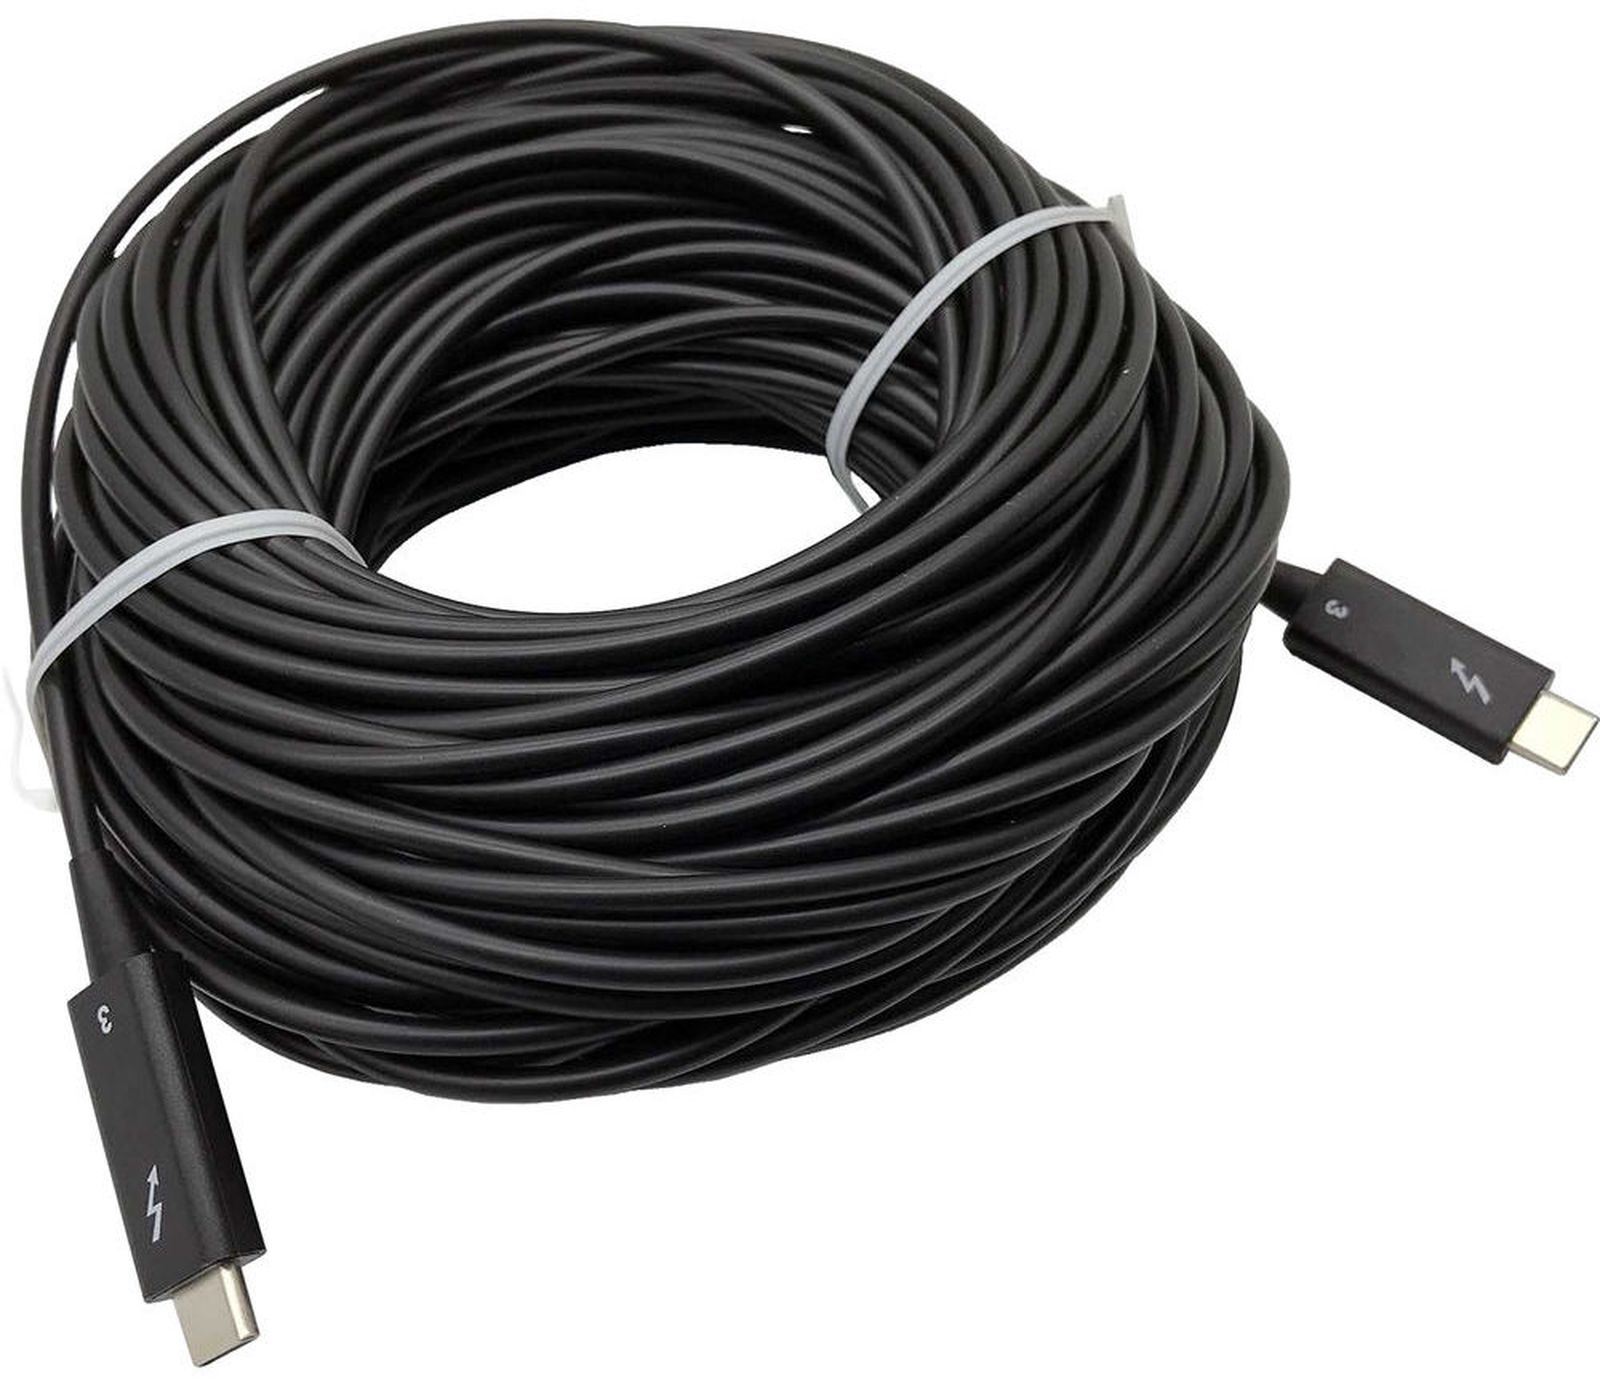 Optical Thunderbolt 3 Cables Begin Rolling Out in Lengths Up to 50 Meters -  MacRumors